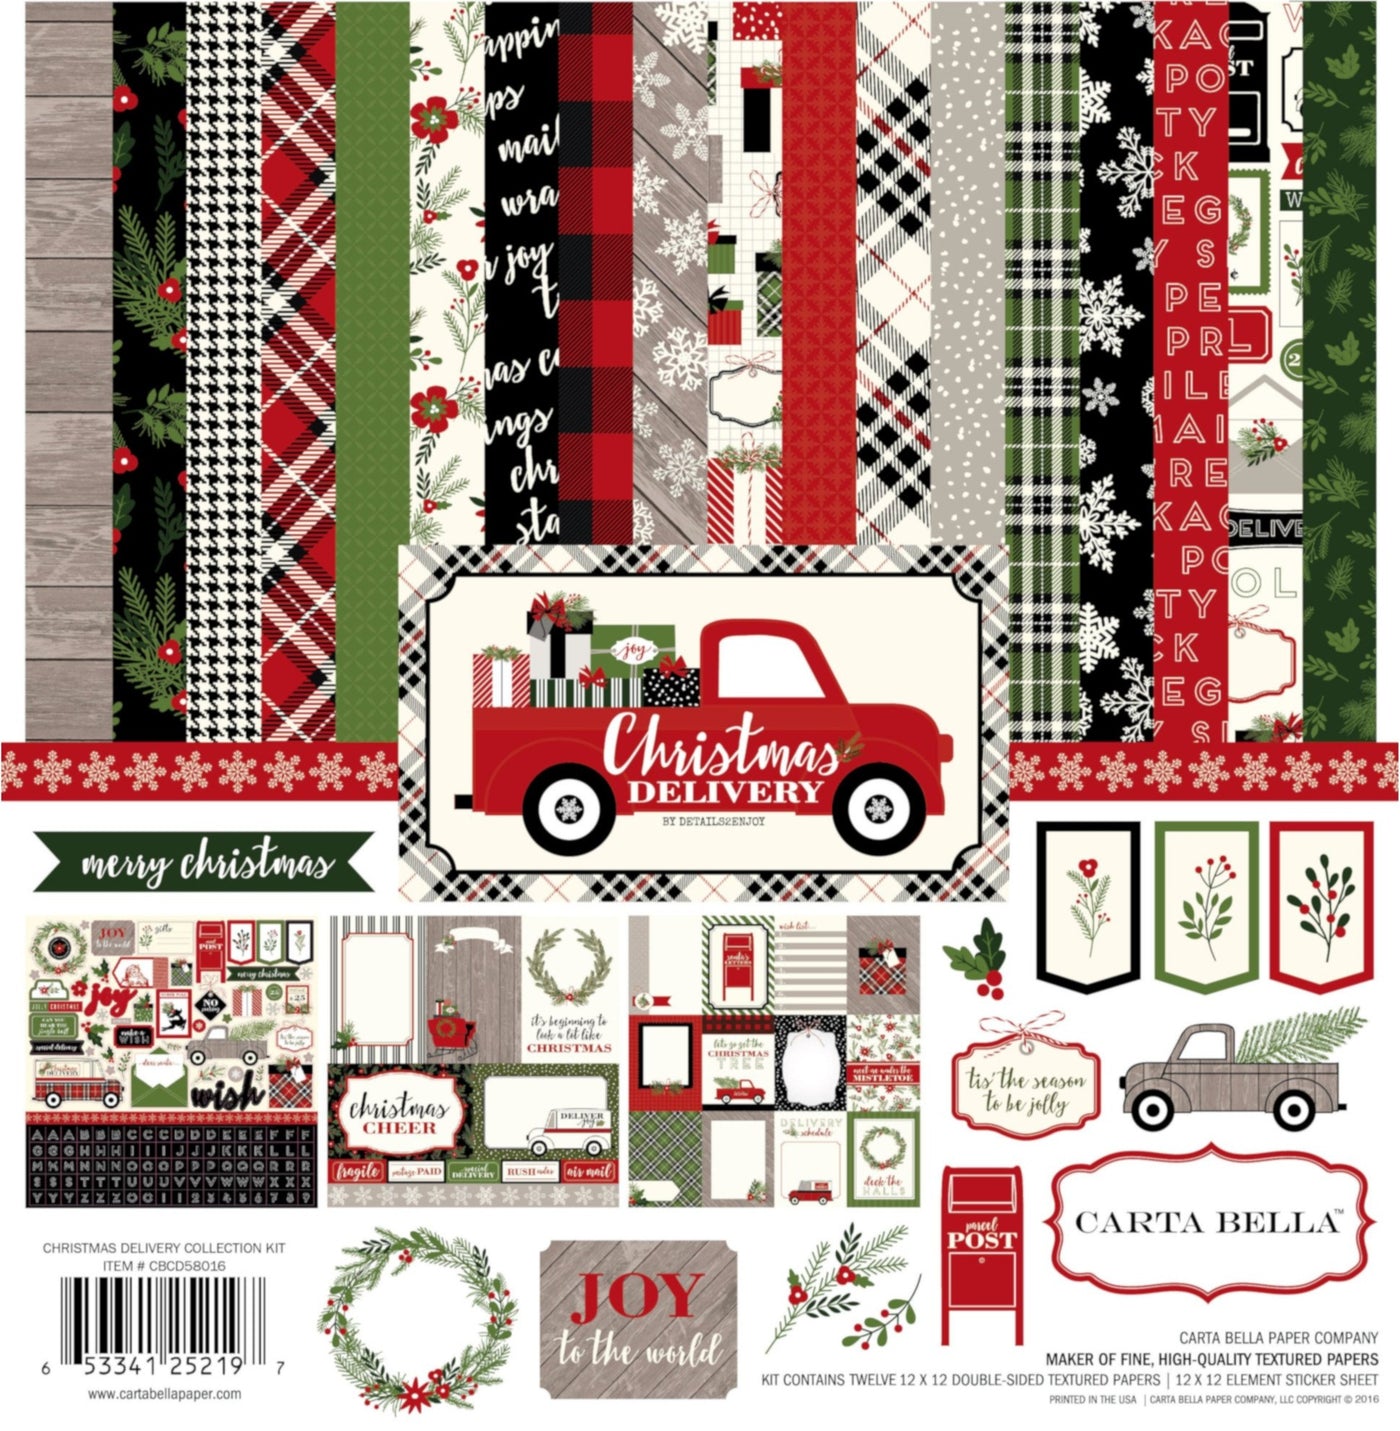 CHRISTMAS DELIVERY Collection Kit from Carta Bella Paper Co. includes coordinated designer 12x12 cardstock designs